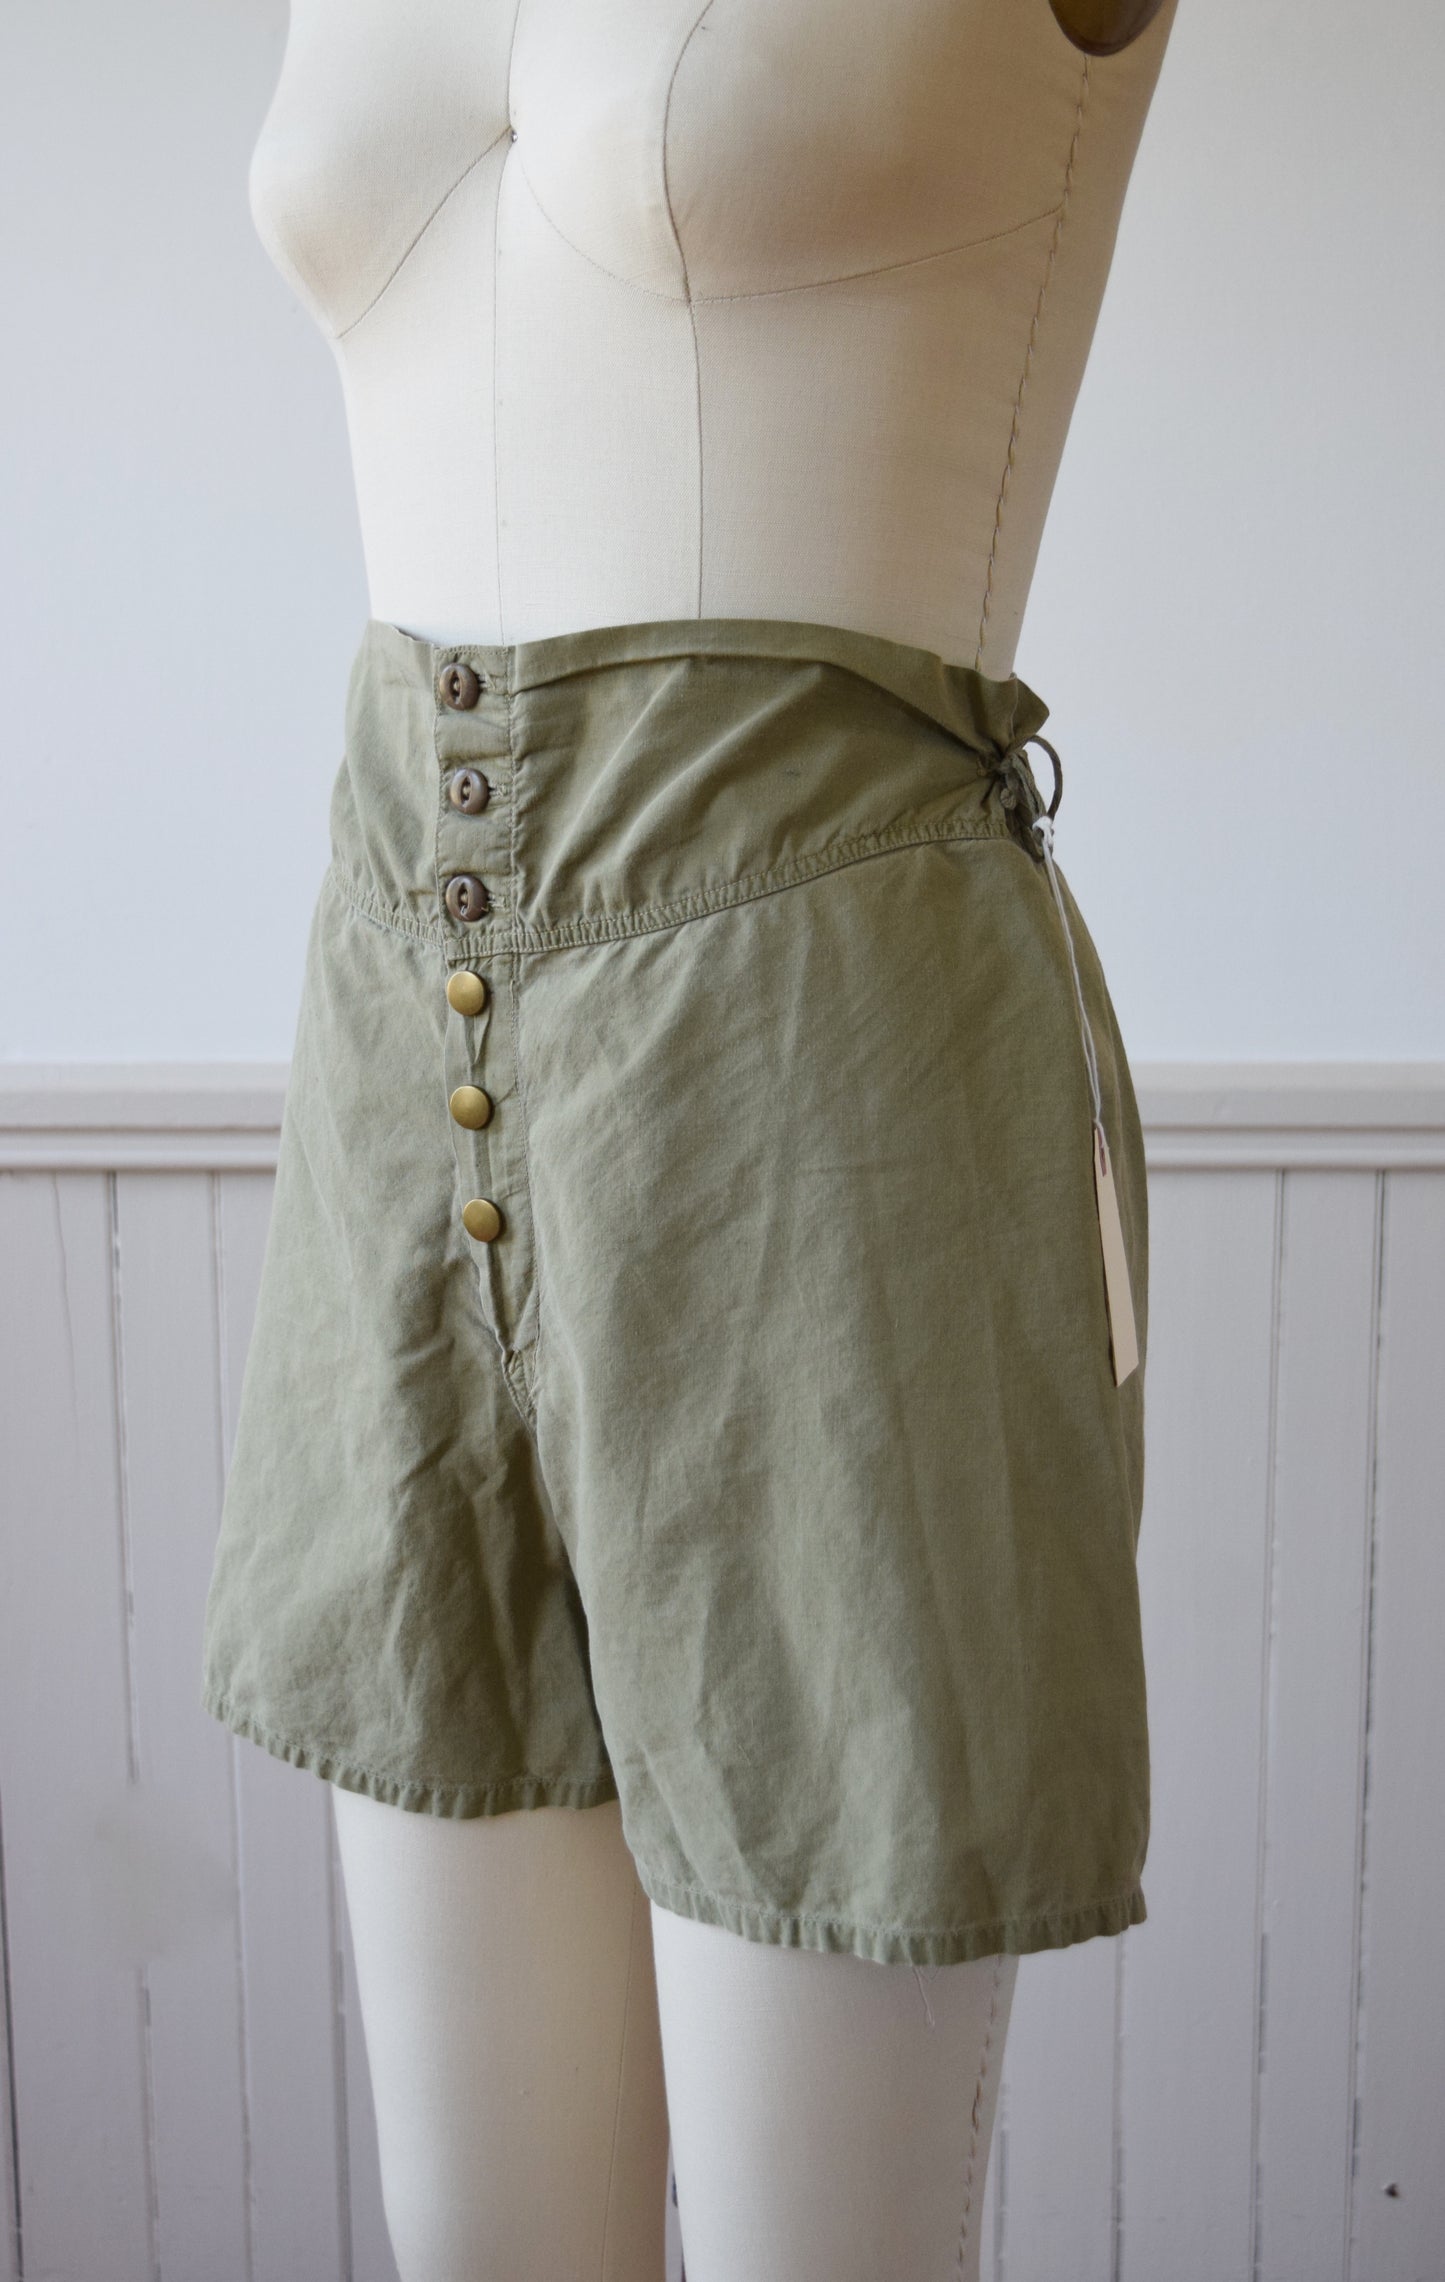 Army Issue Boxer Shorts | 1940s | 5 | S/M